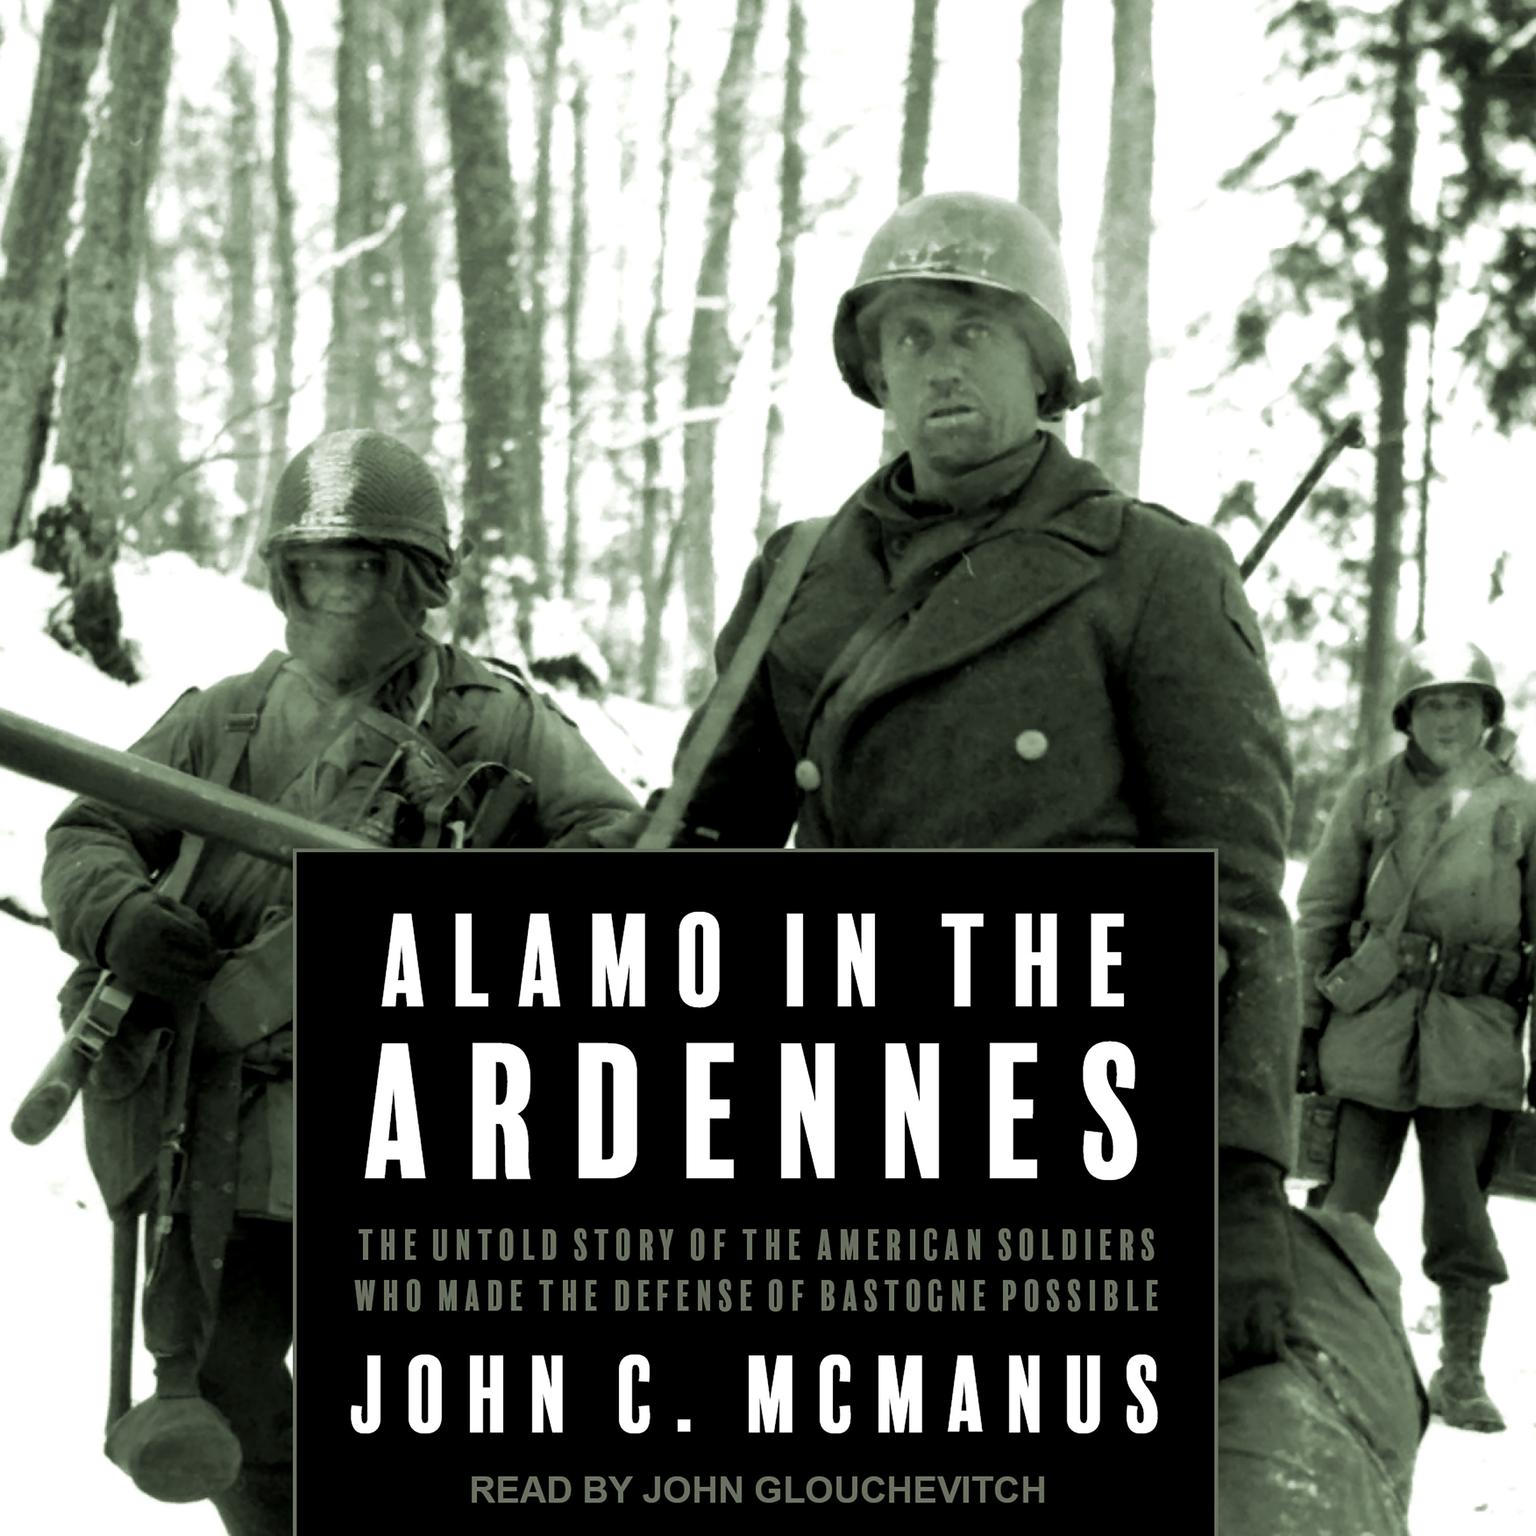 Alamo in the Ardennes: The Untold Story of the American Soldiers Who Made the Defense of Bastogne Possible Audiobook, by John C. McManus